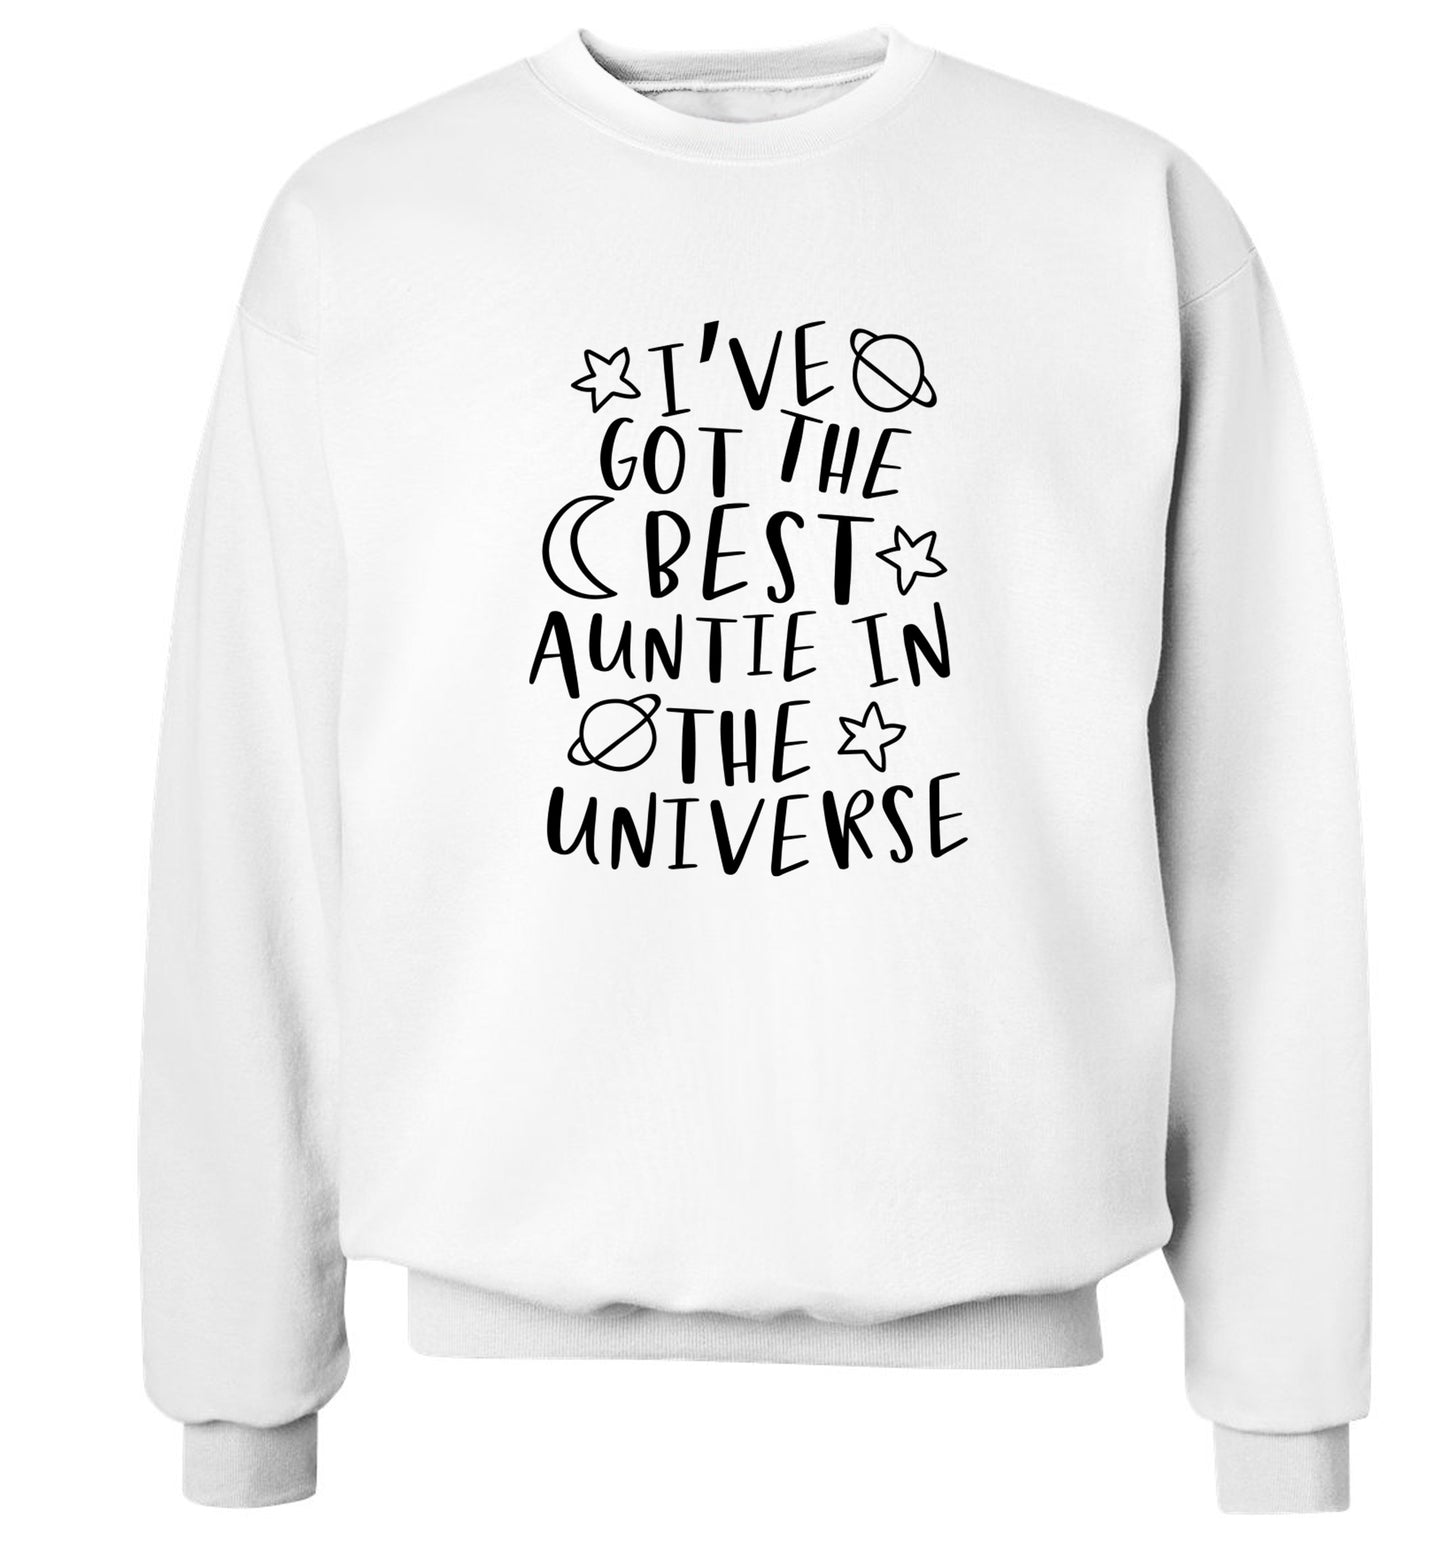 I've got the best auntie in the universe Adult's unisex white Sweater 2XL